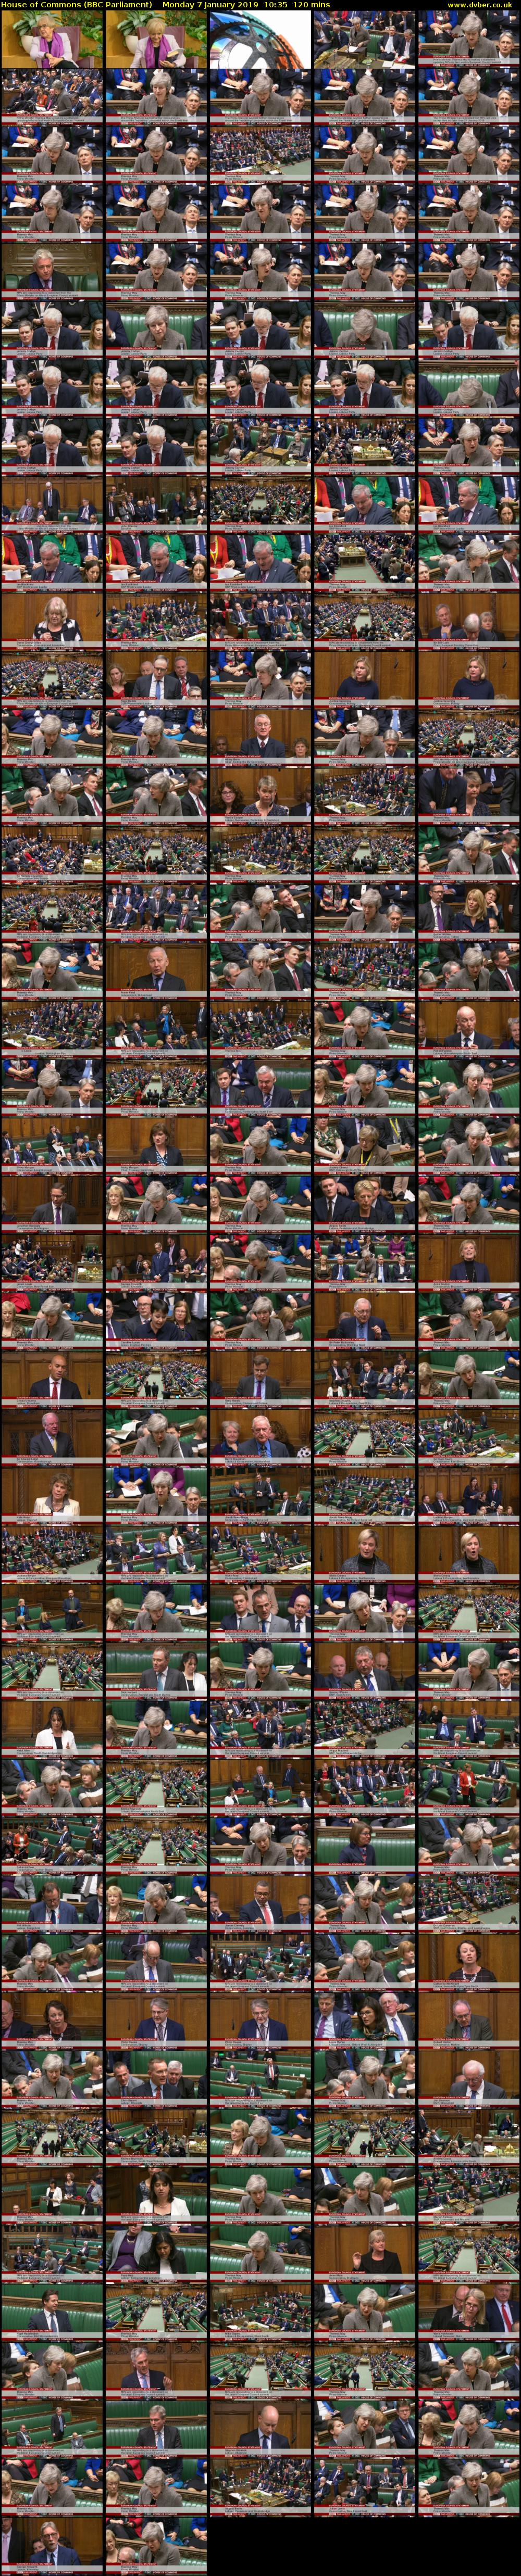 House of Commons (BBC Parliament) Monday 7 January 2019 10:35 - 12:35